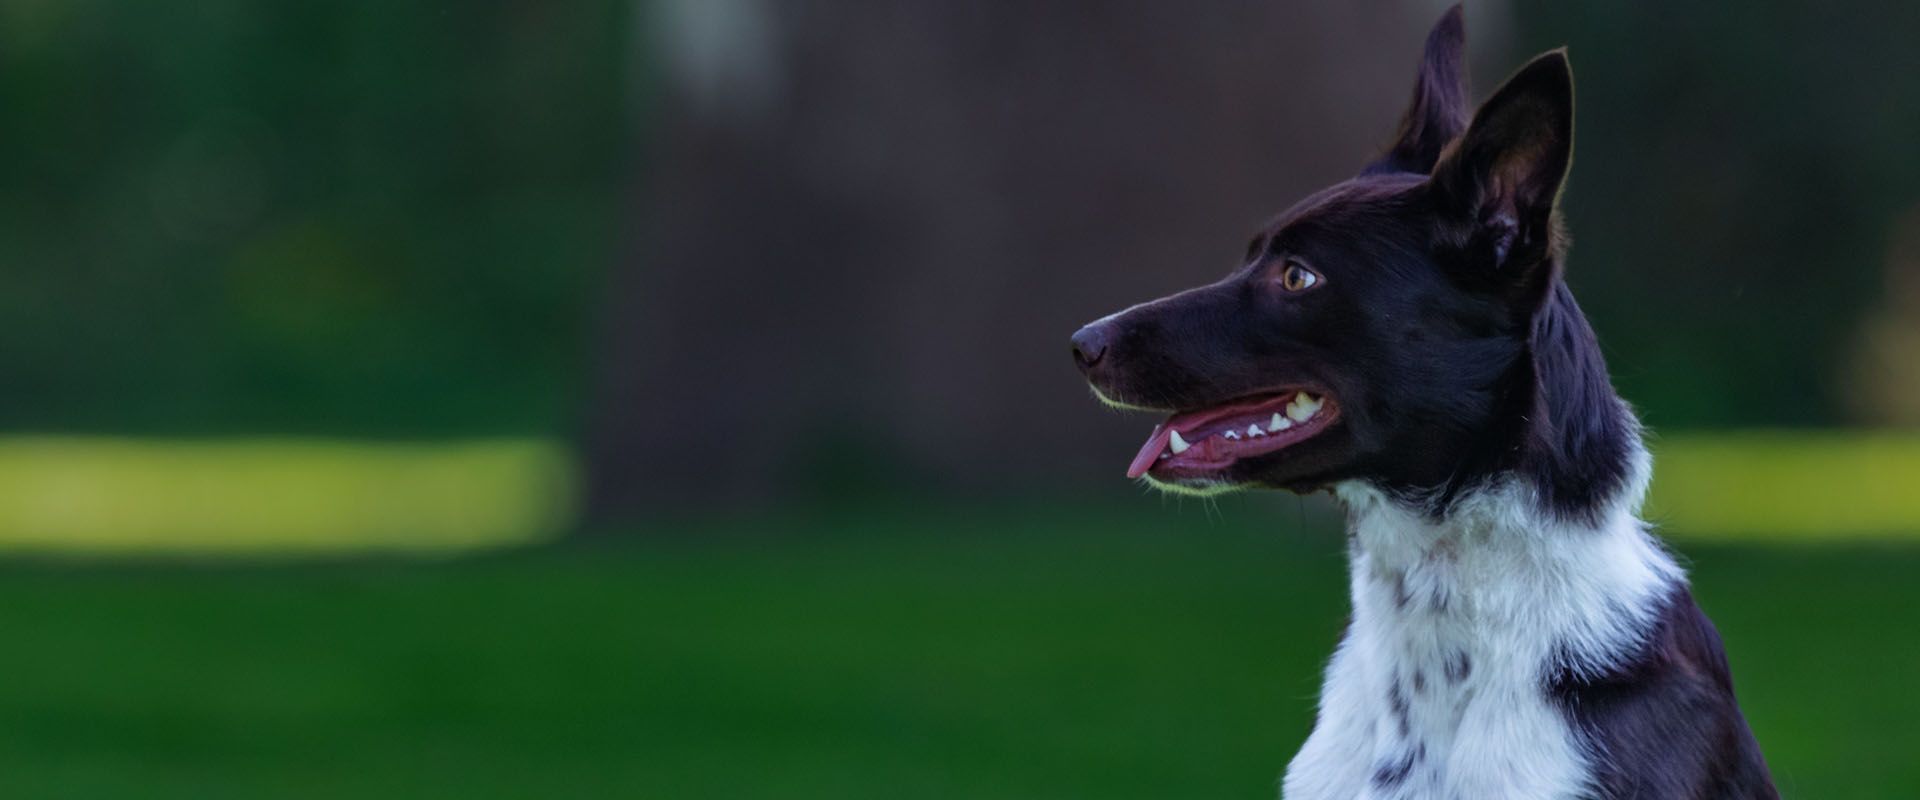 border collie outdoor at park field